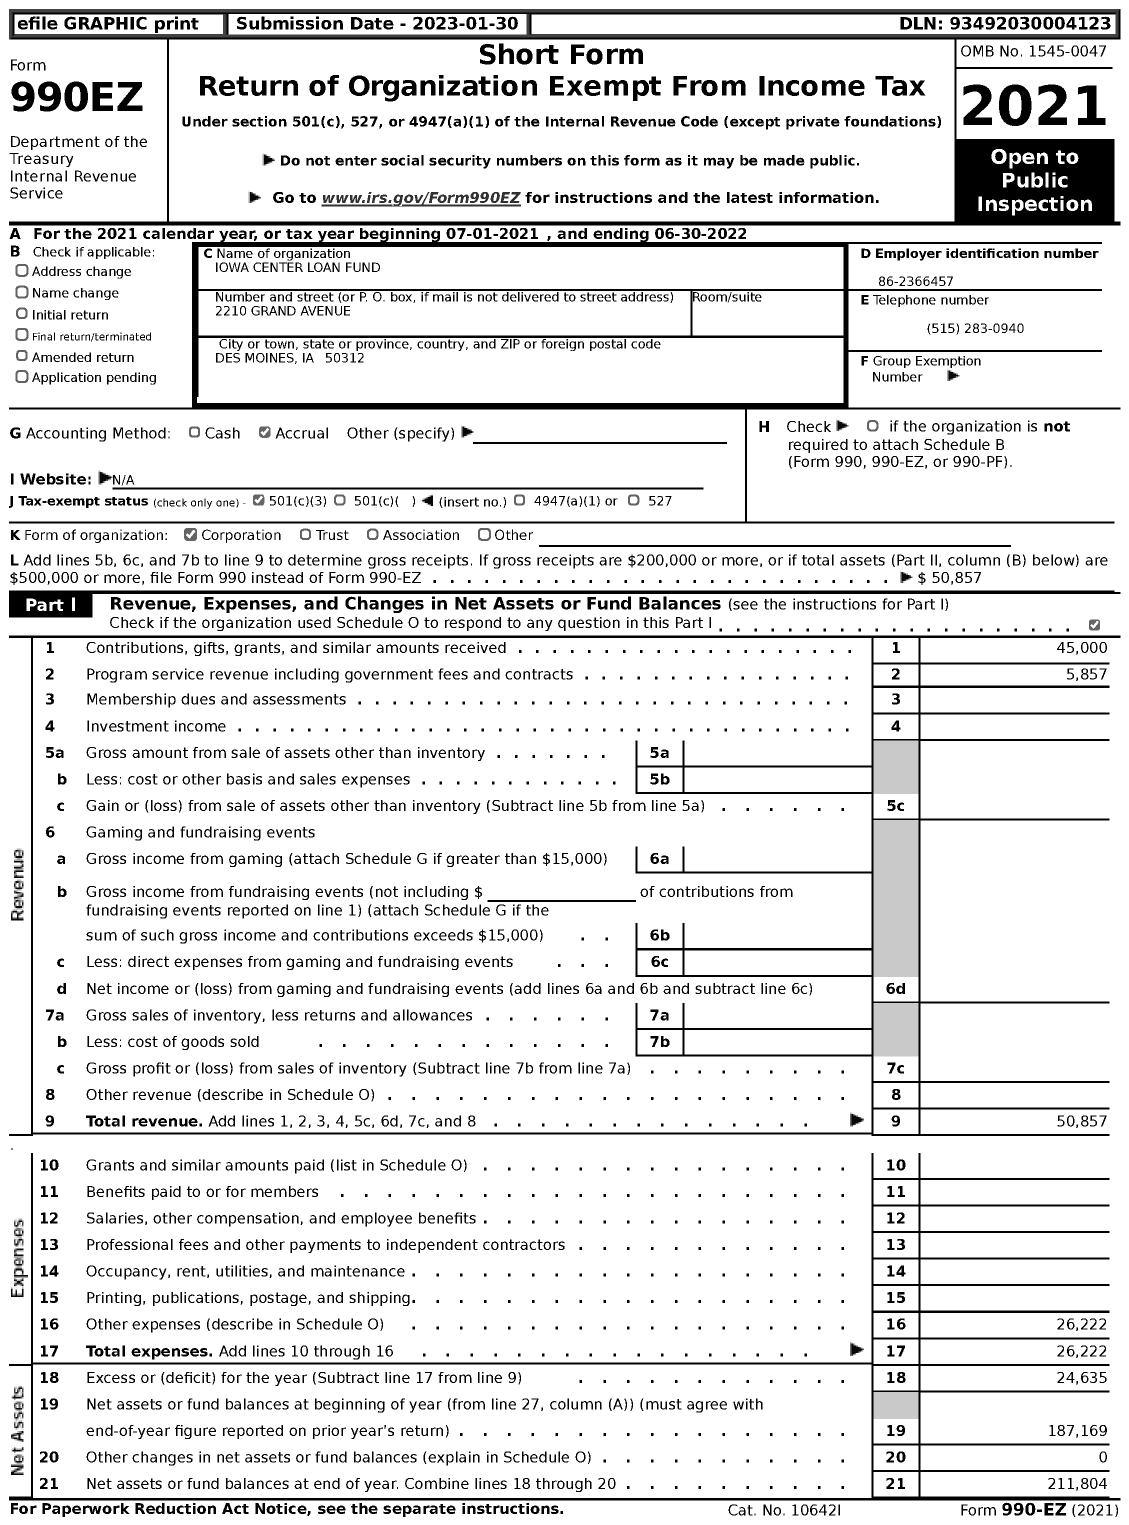 Image of first page of 2021 Form 990EZ for Iowa Center Loan Fund